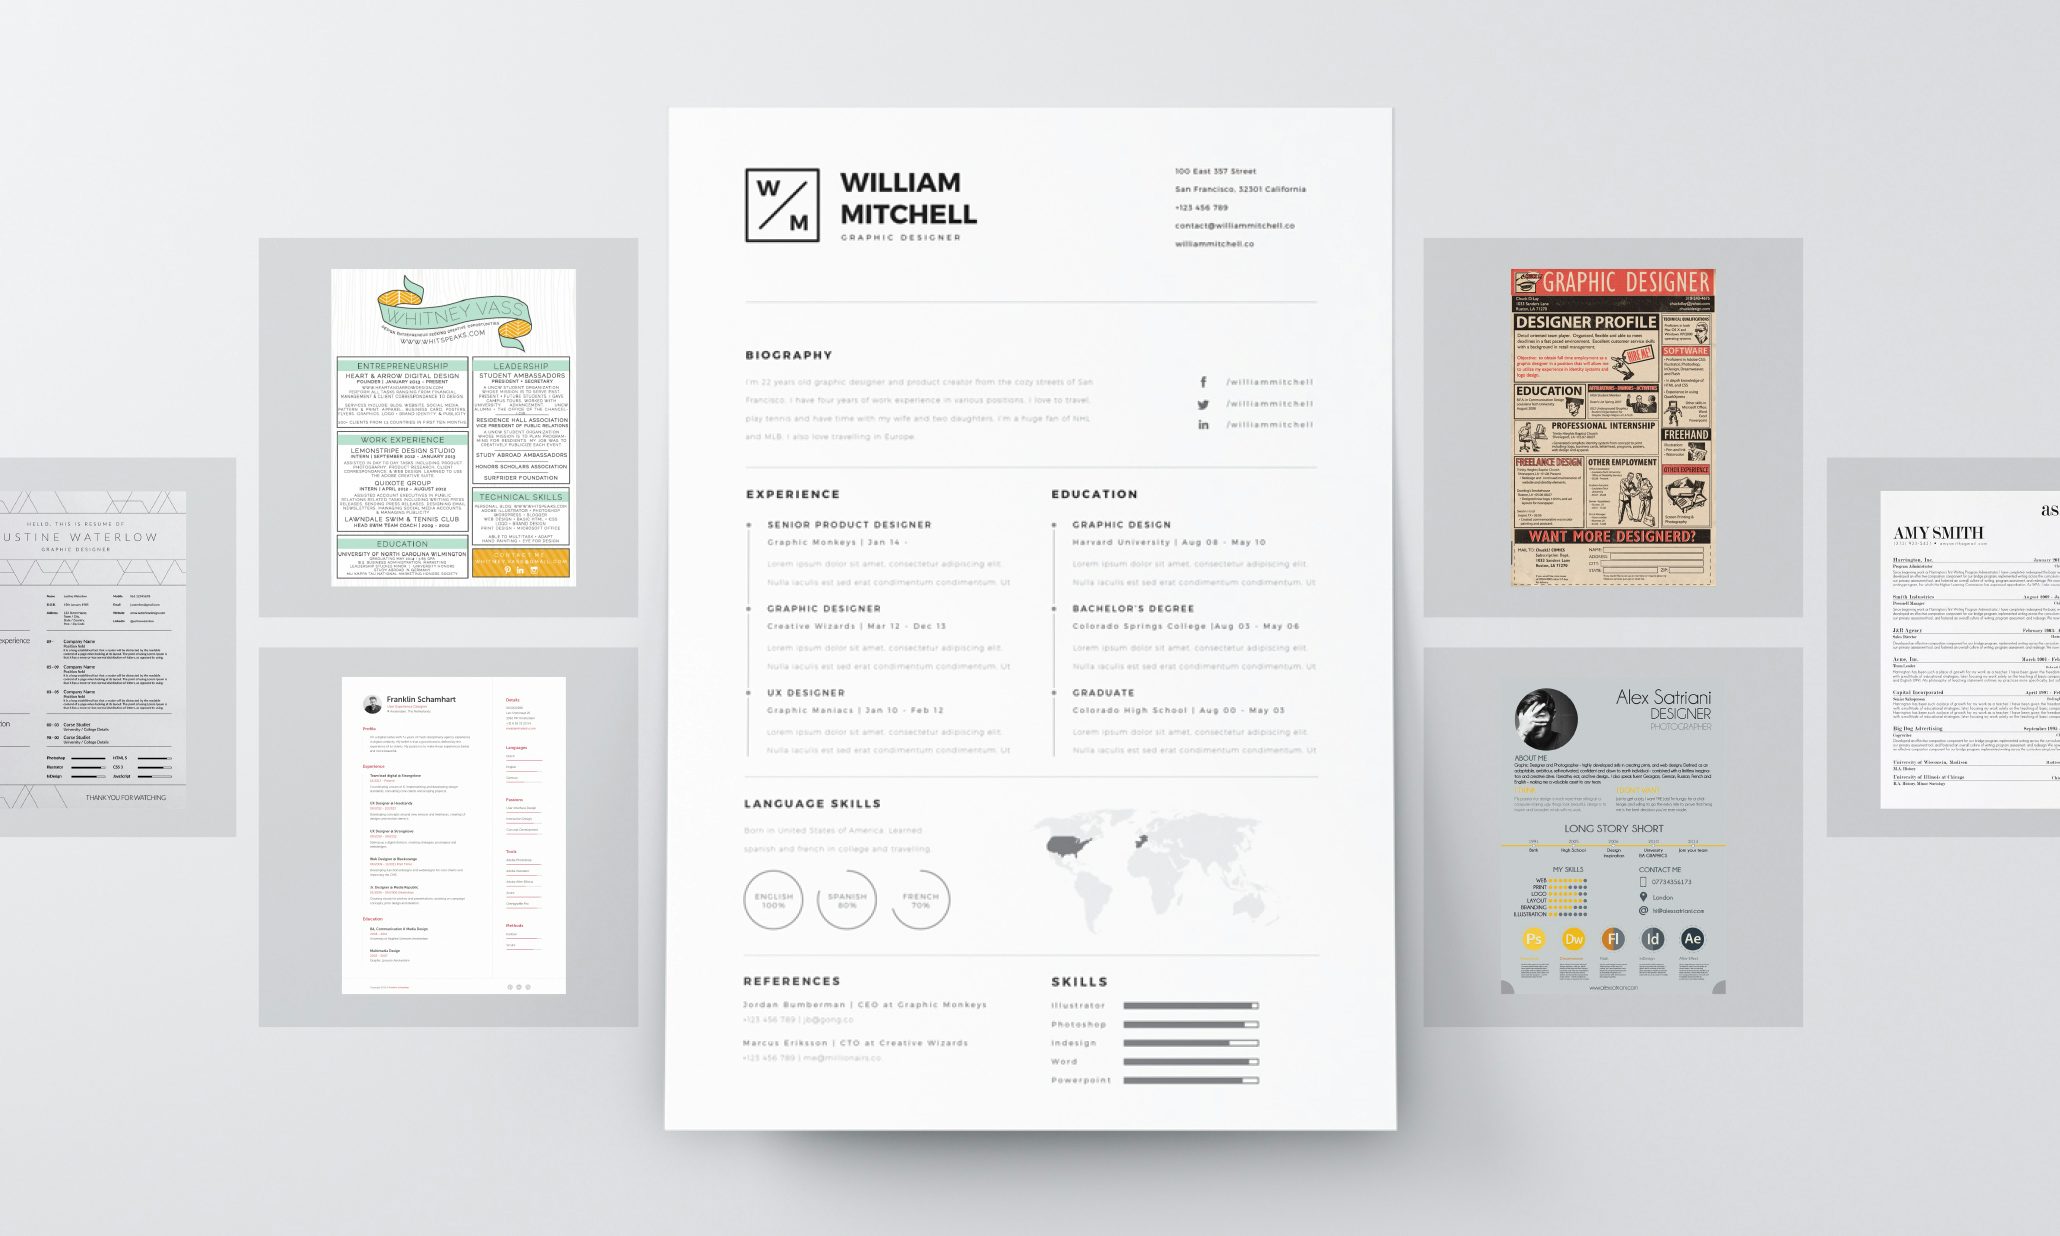 7 Resume Design Principles That Will Get You Hired 99designs